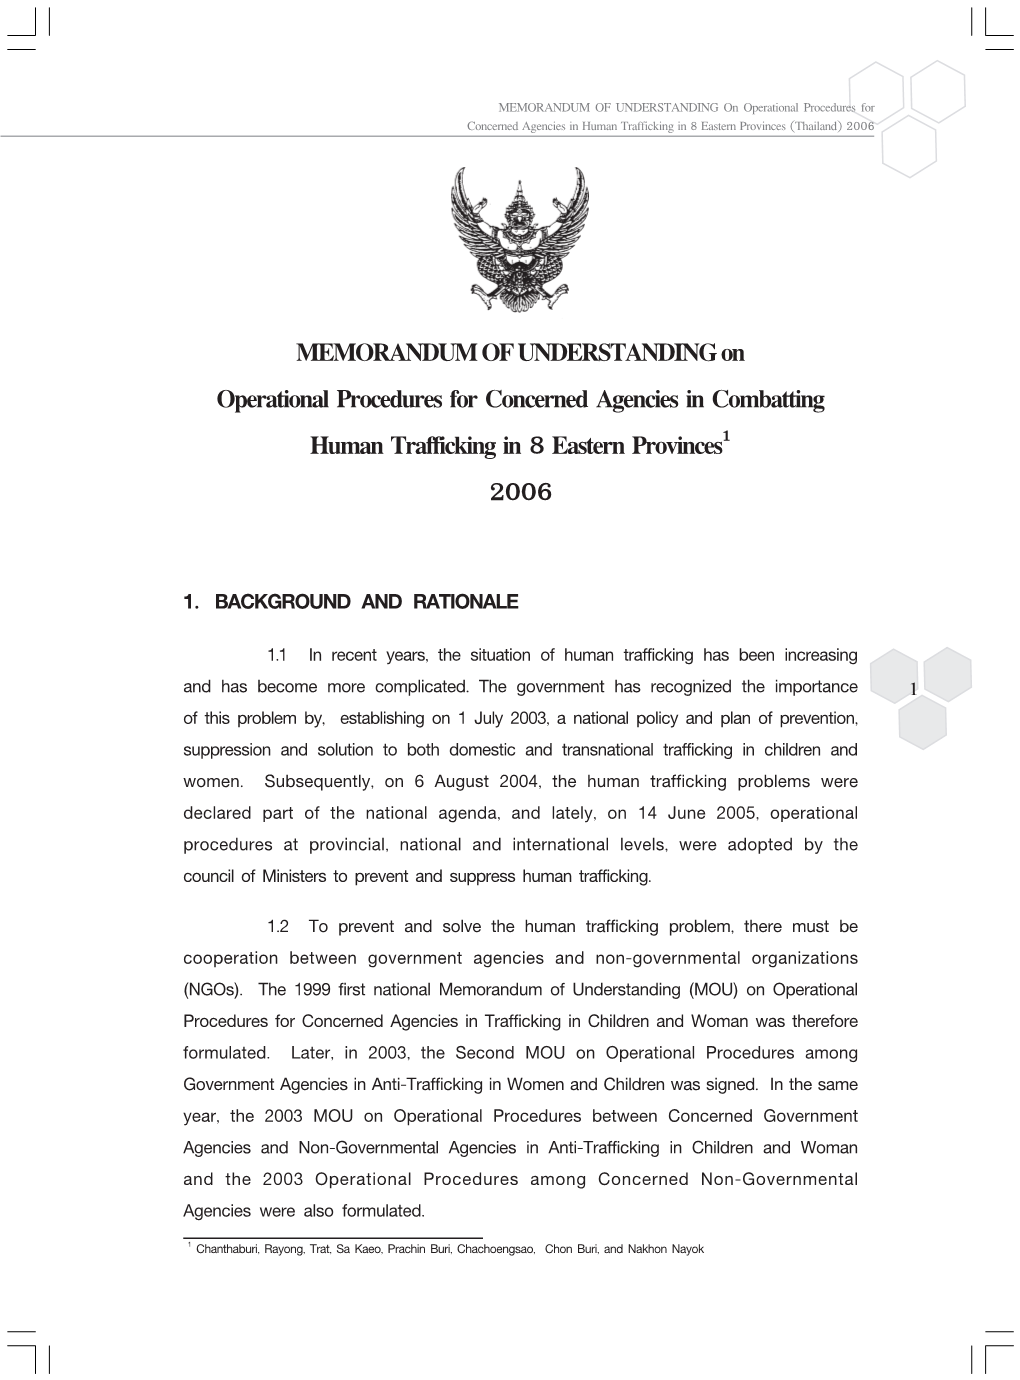 Mou on Operational Procedures for Concerned Agencies in Combating Human Trafficking in 8 Eastern Provinces 2006